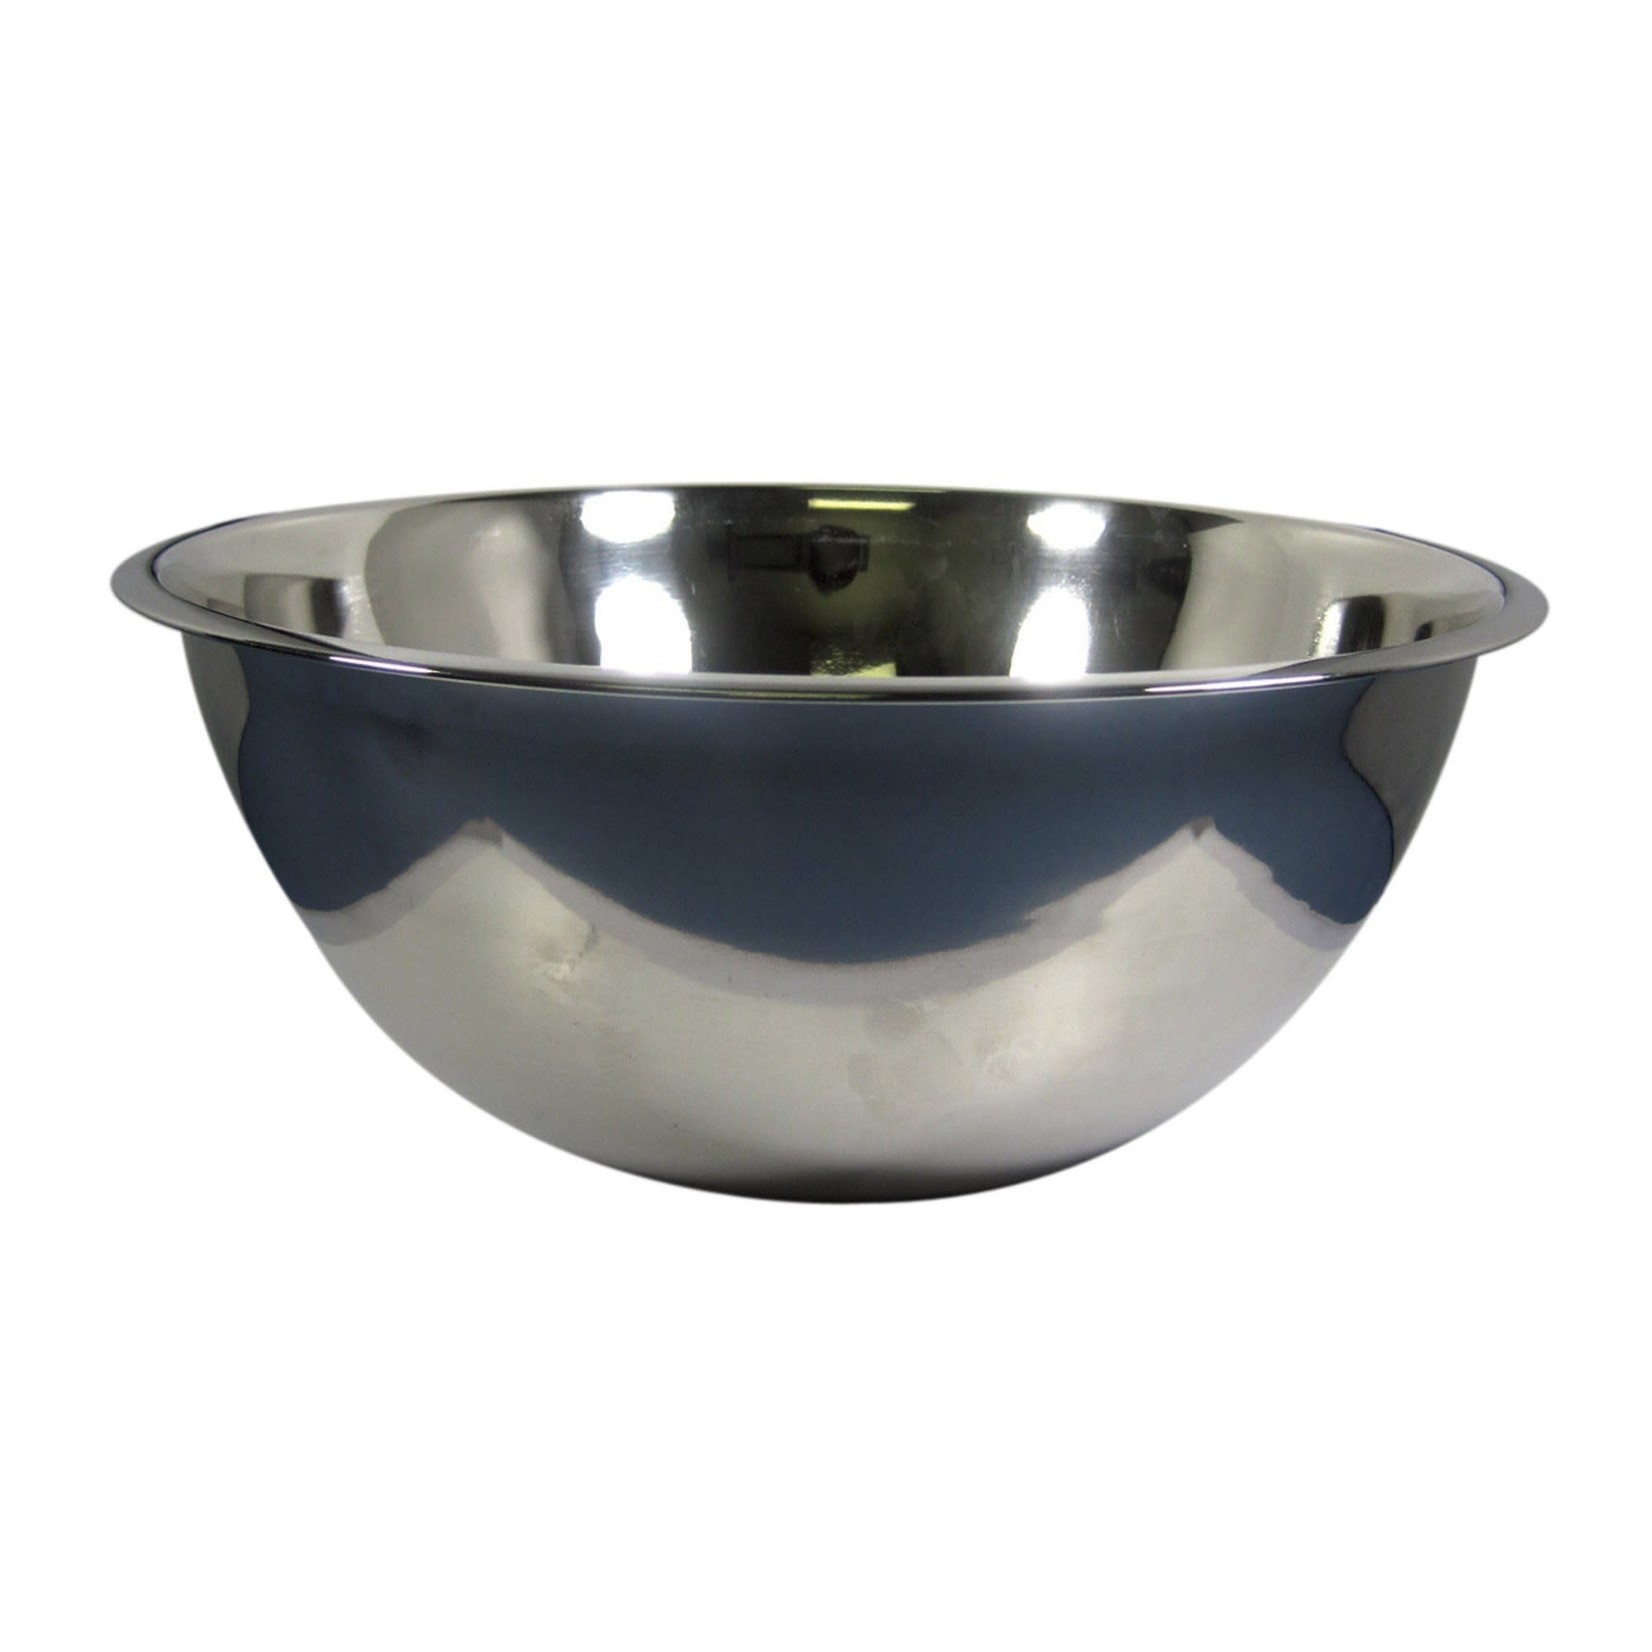 PORT STYLE PORT STYLE Mixing Bowl 8qt - Stainless